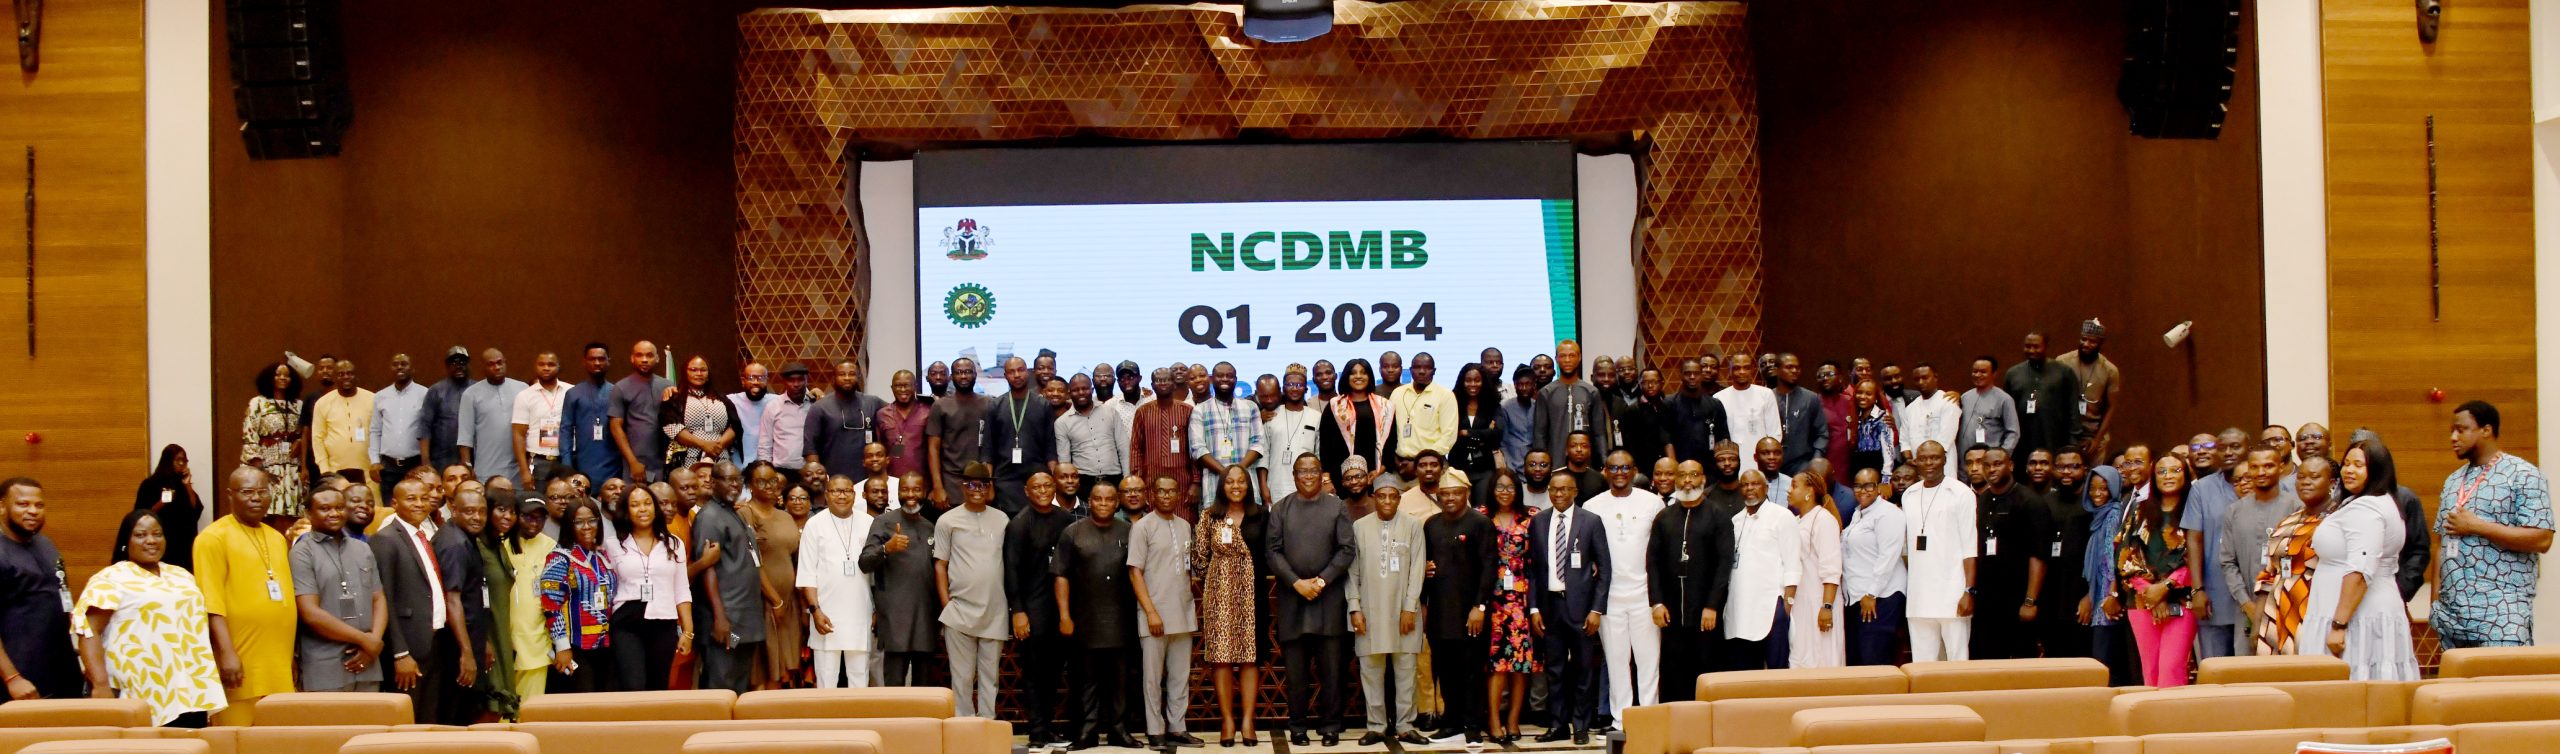 NCDMB boss, Ogbe canvasses for team spirit among staff members